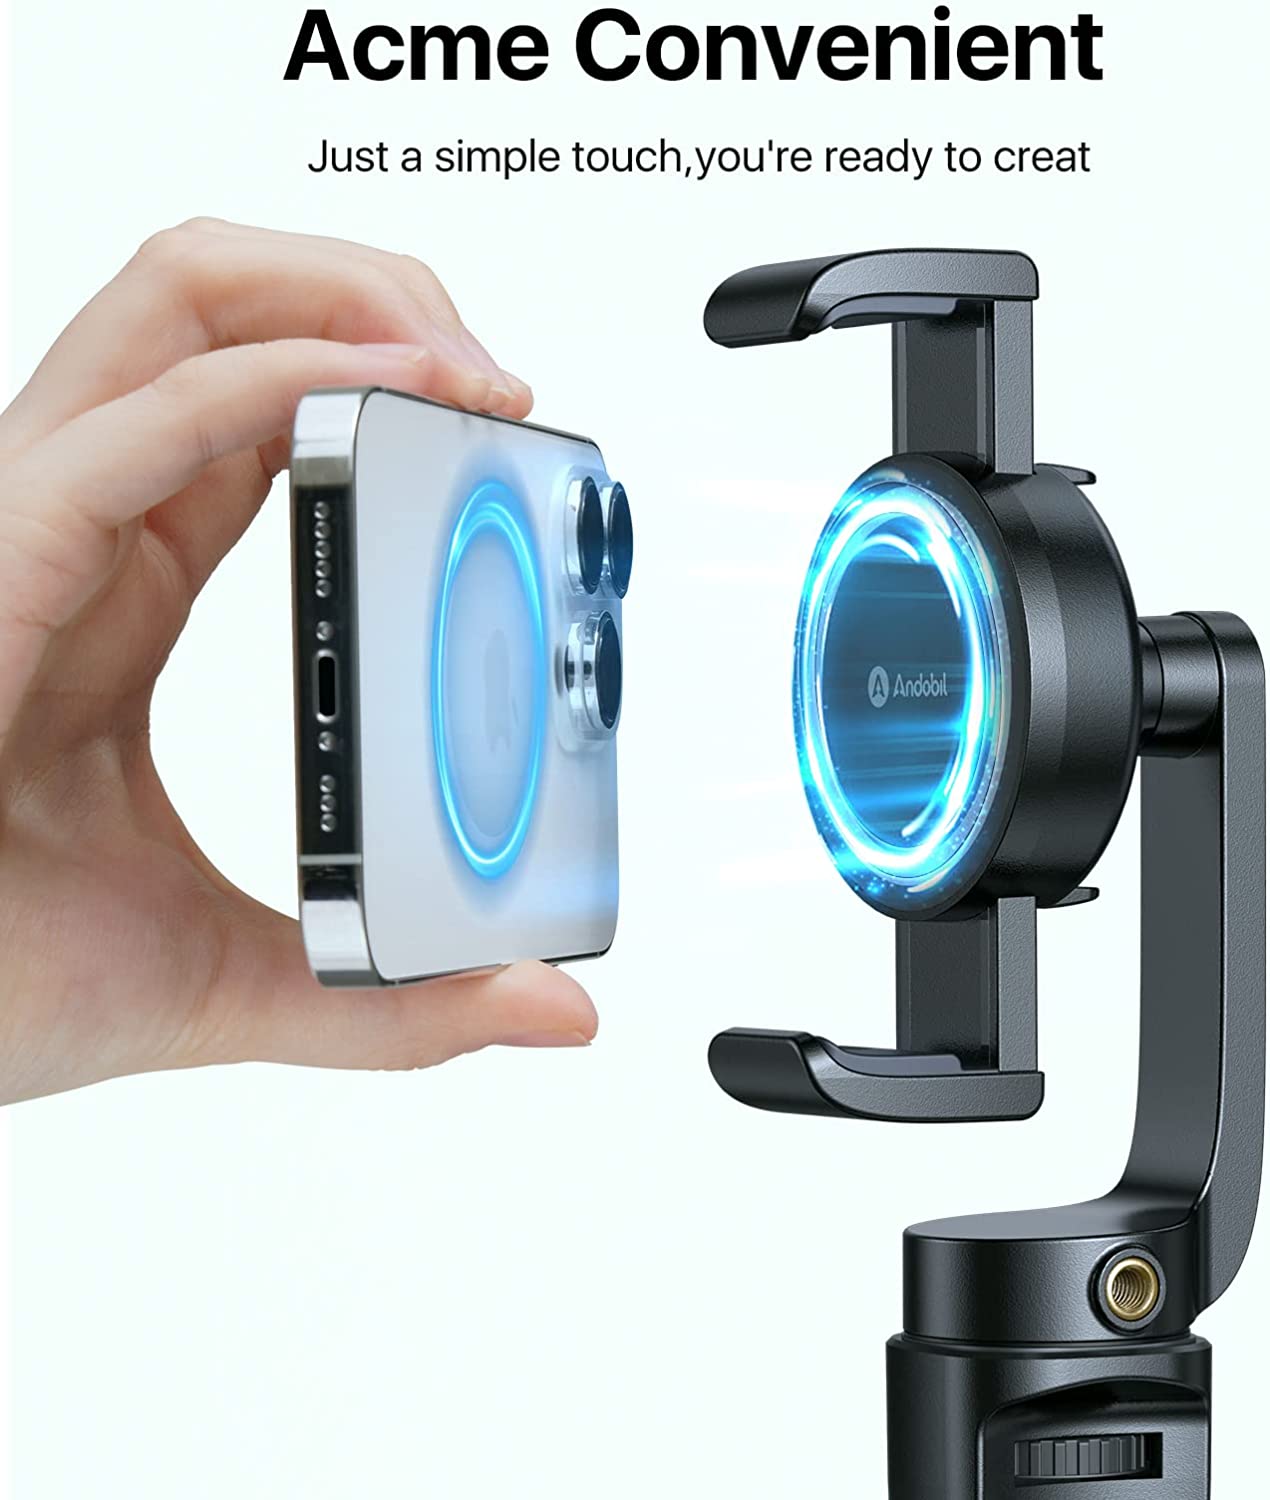 Andobil iPhone Tripod Stand - Free Your Hands, Enjoy Your Life